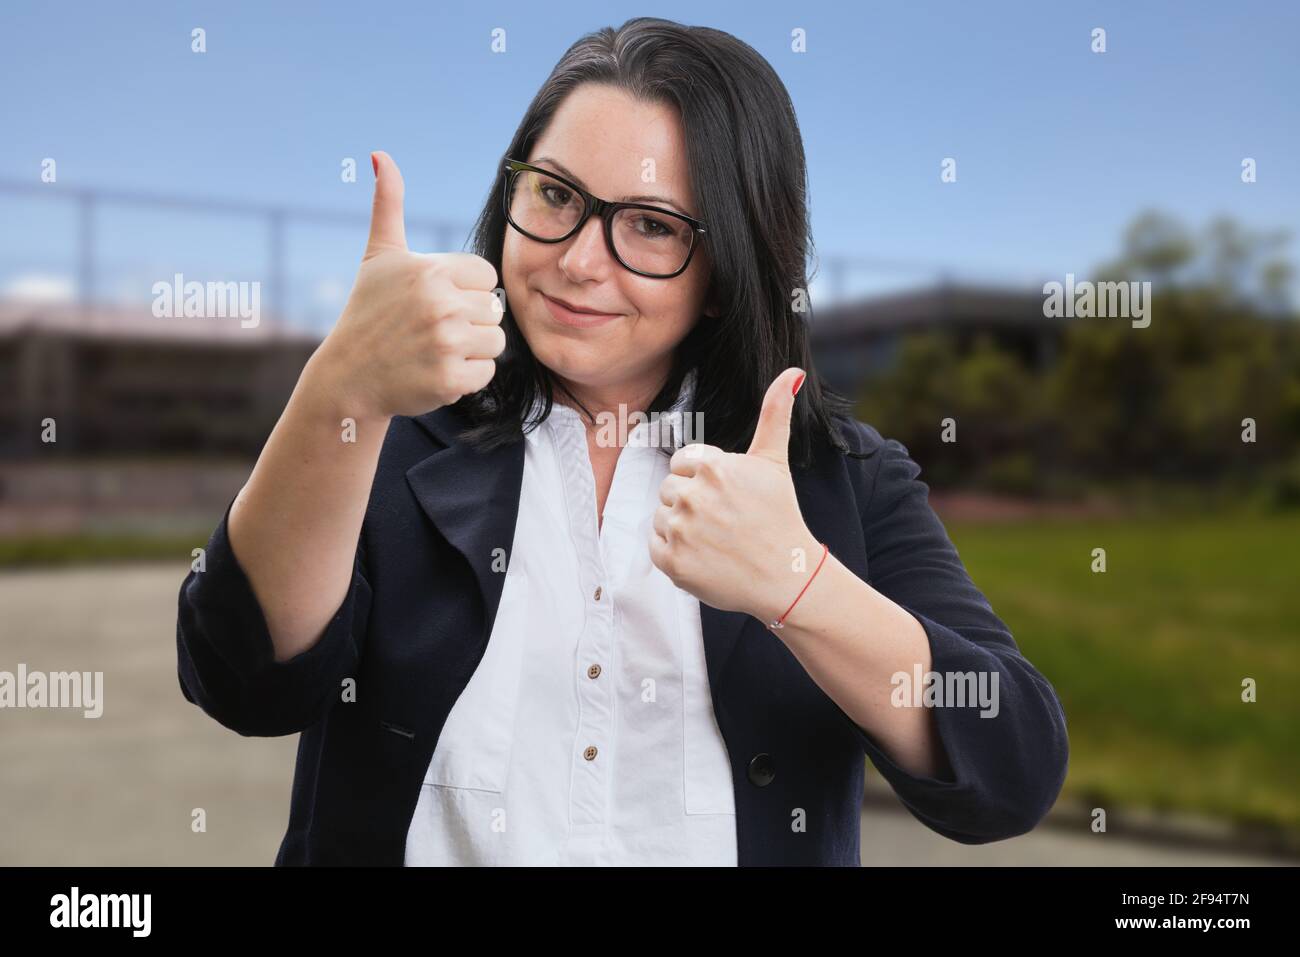 Cheerful businesswoman wearing corporate office suit showing double thumbs-up gesture like concept in park nature break background Stock Photo